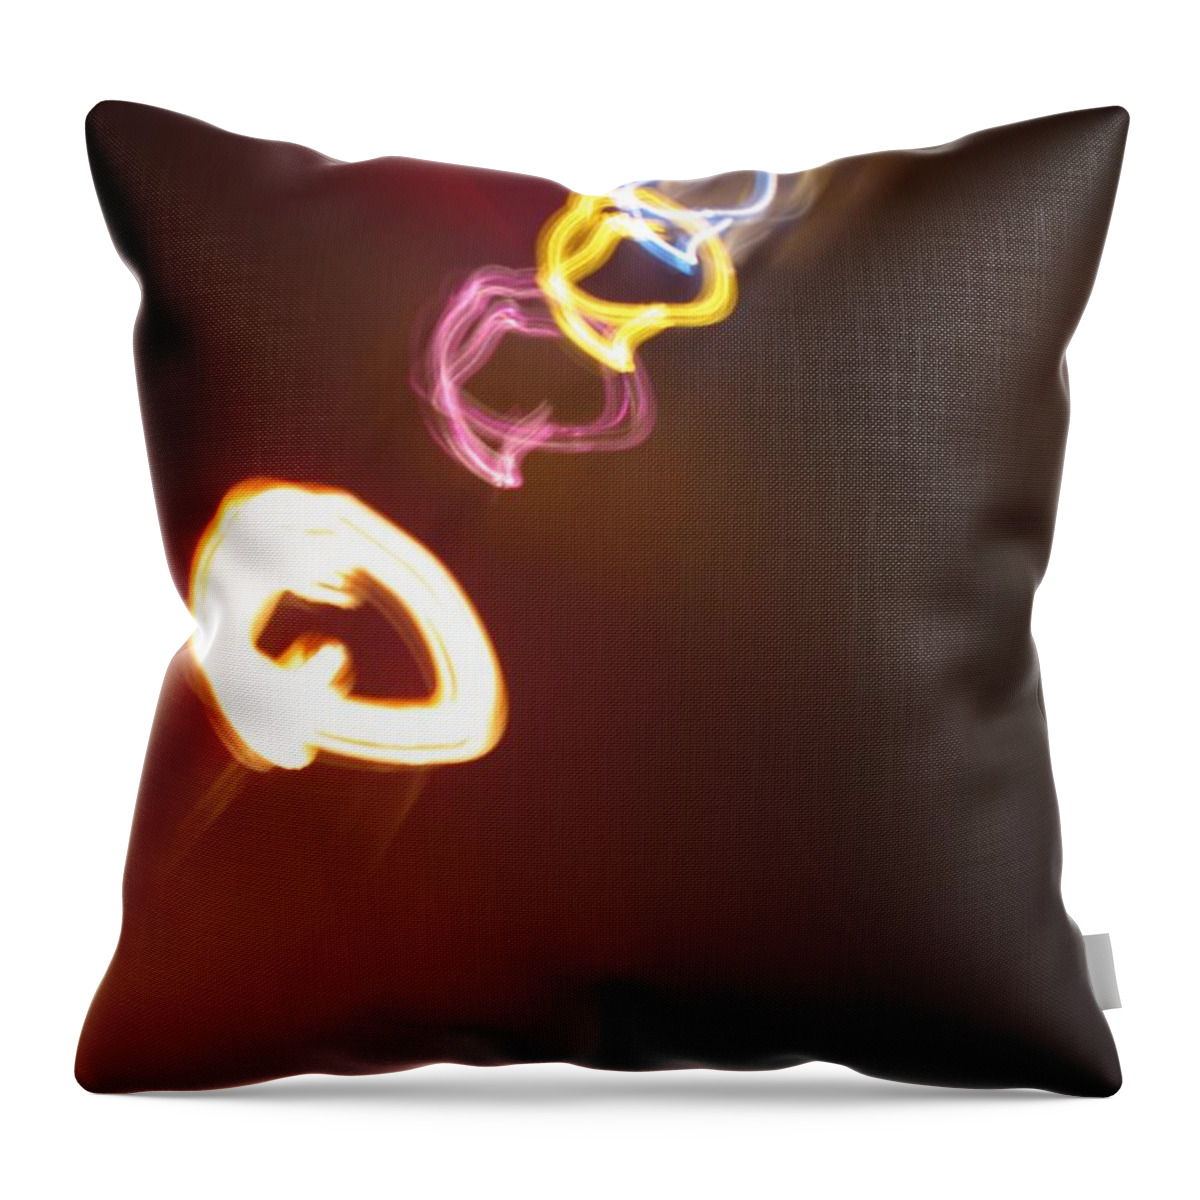 Dancing Lights Throw Pillow featuring the photograph Smoke in Colors by Ausra Huntington nee Paulauskaite